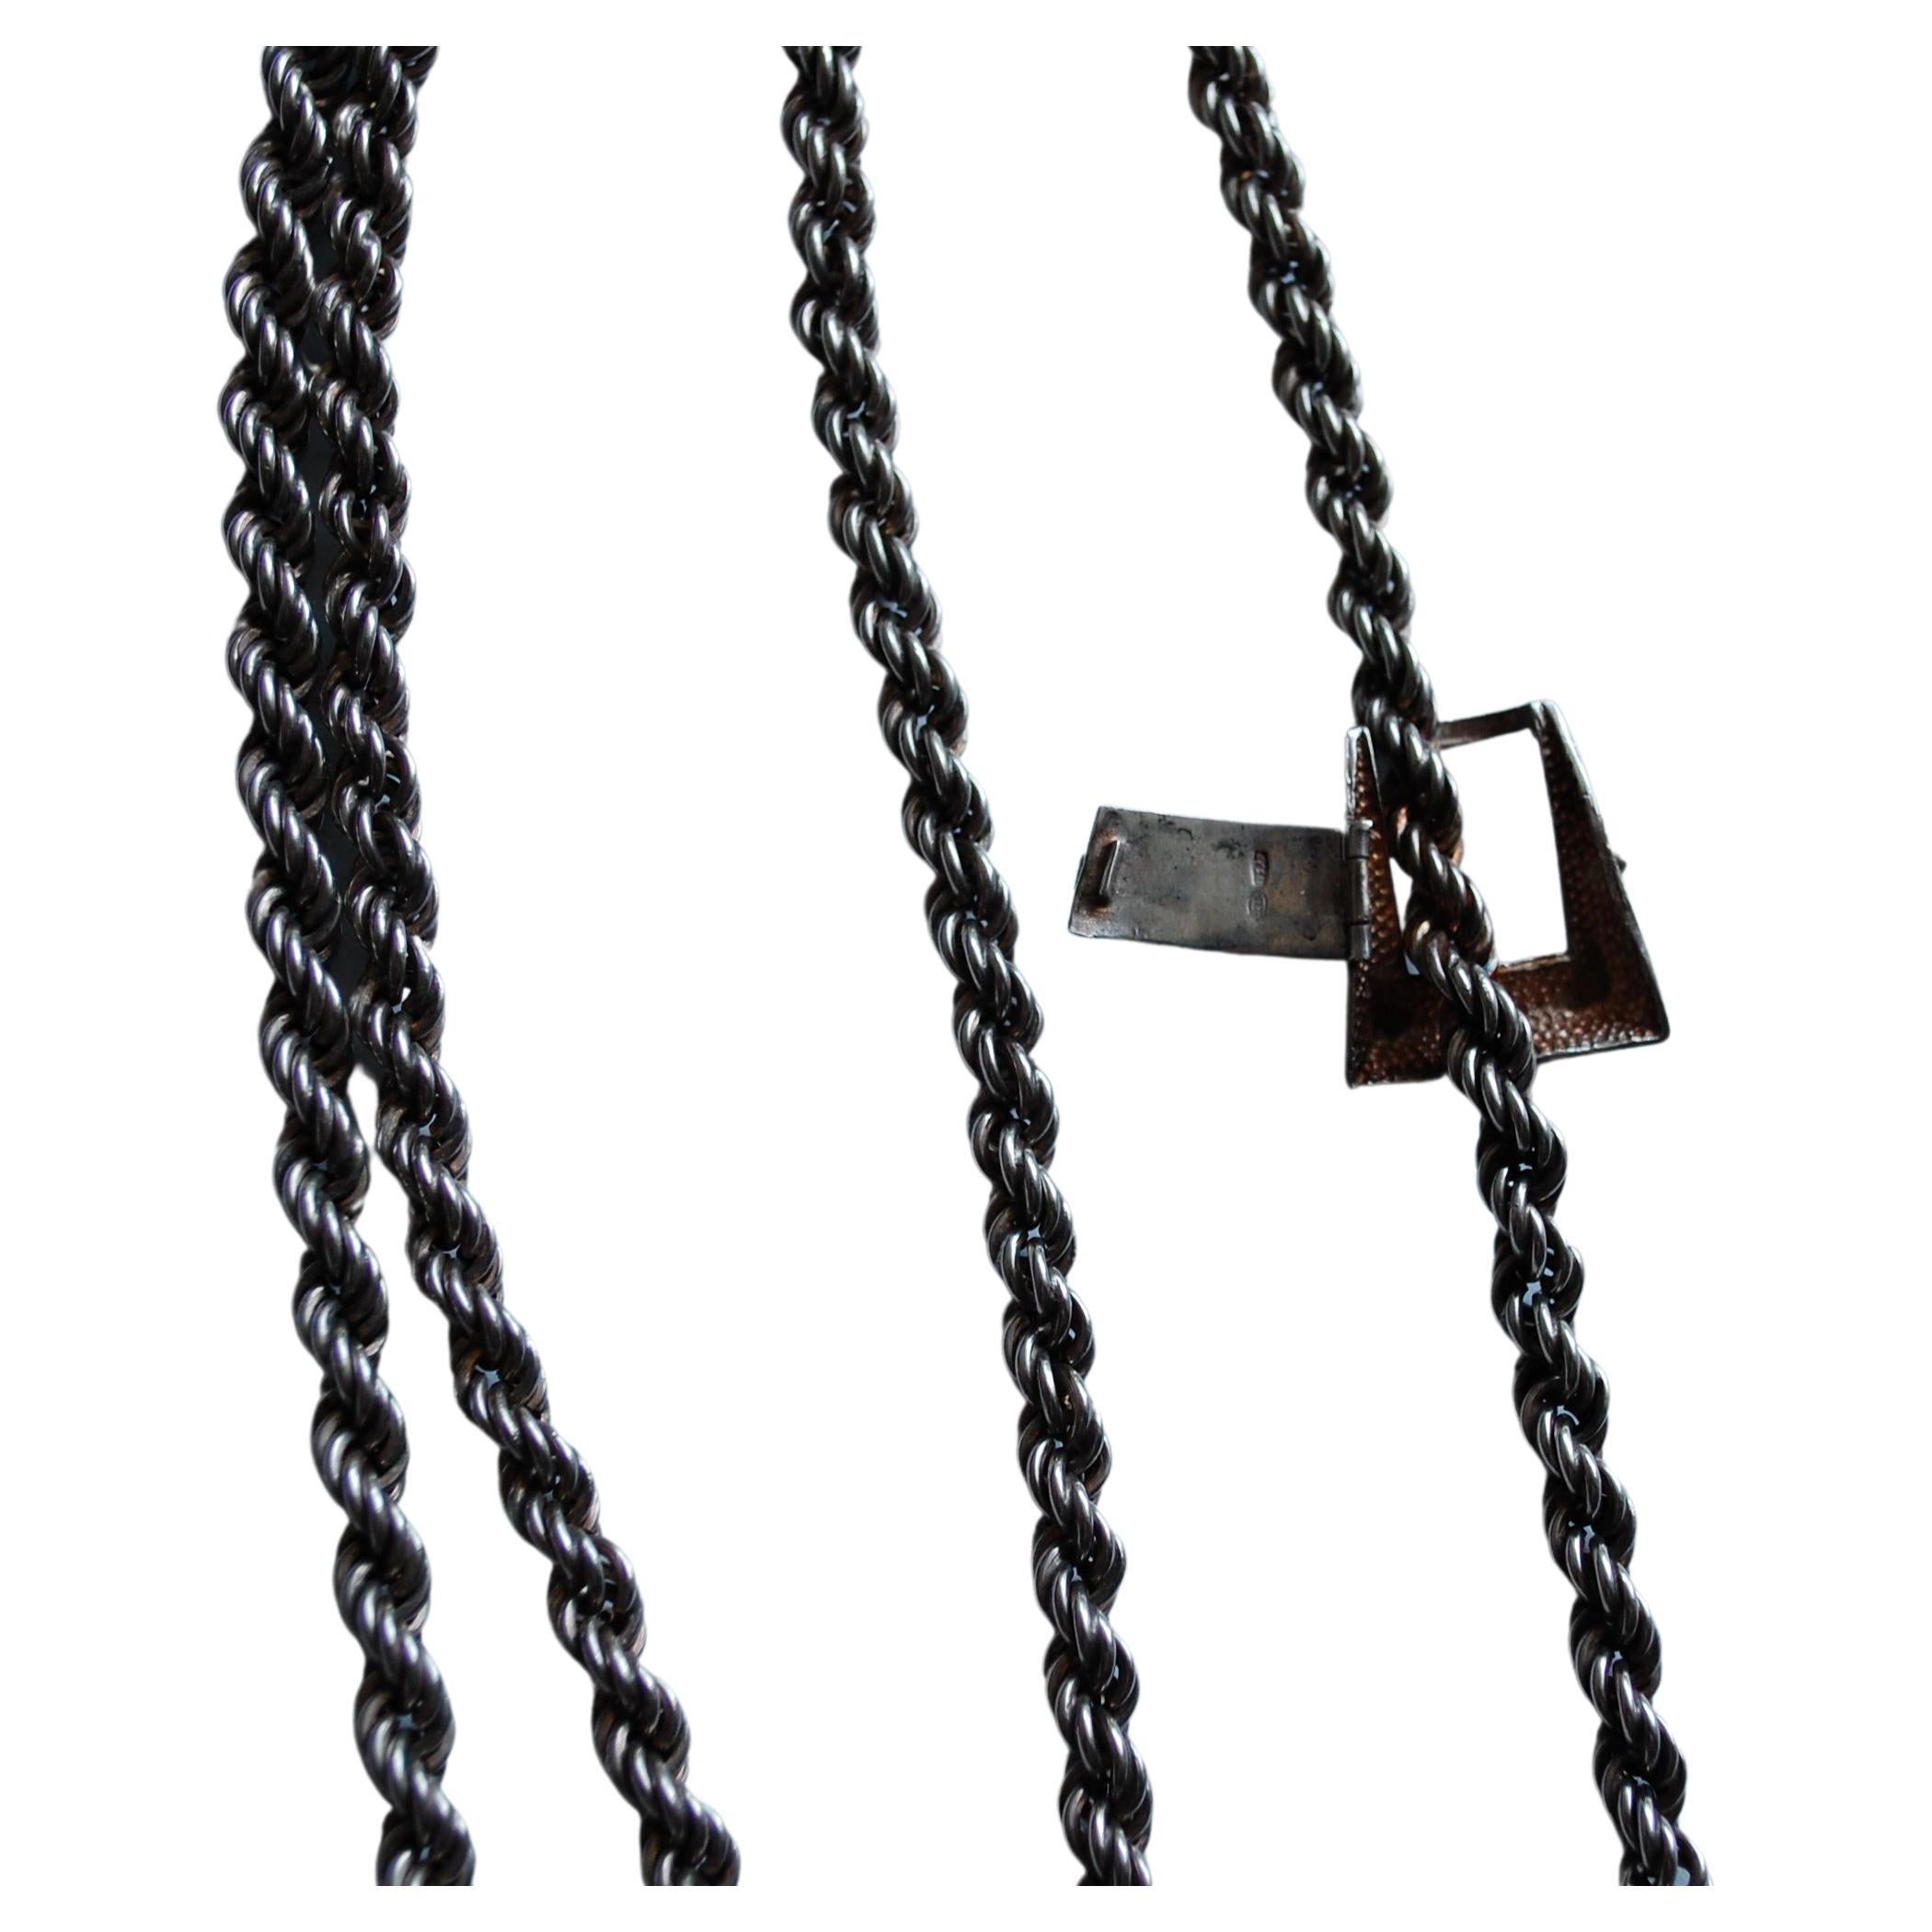 Vintage Italian sterling 925, 103 AR (Arezzo in Italy) rope necklace with fringes on each end a buckle as clasp. Total length 43 inches, 0.25 wide about 100 grams. You have two options to wear it long or short.